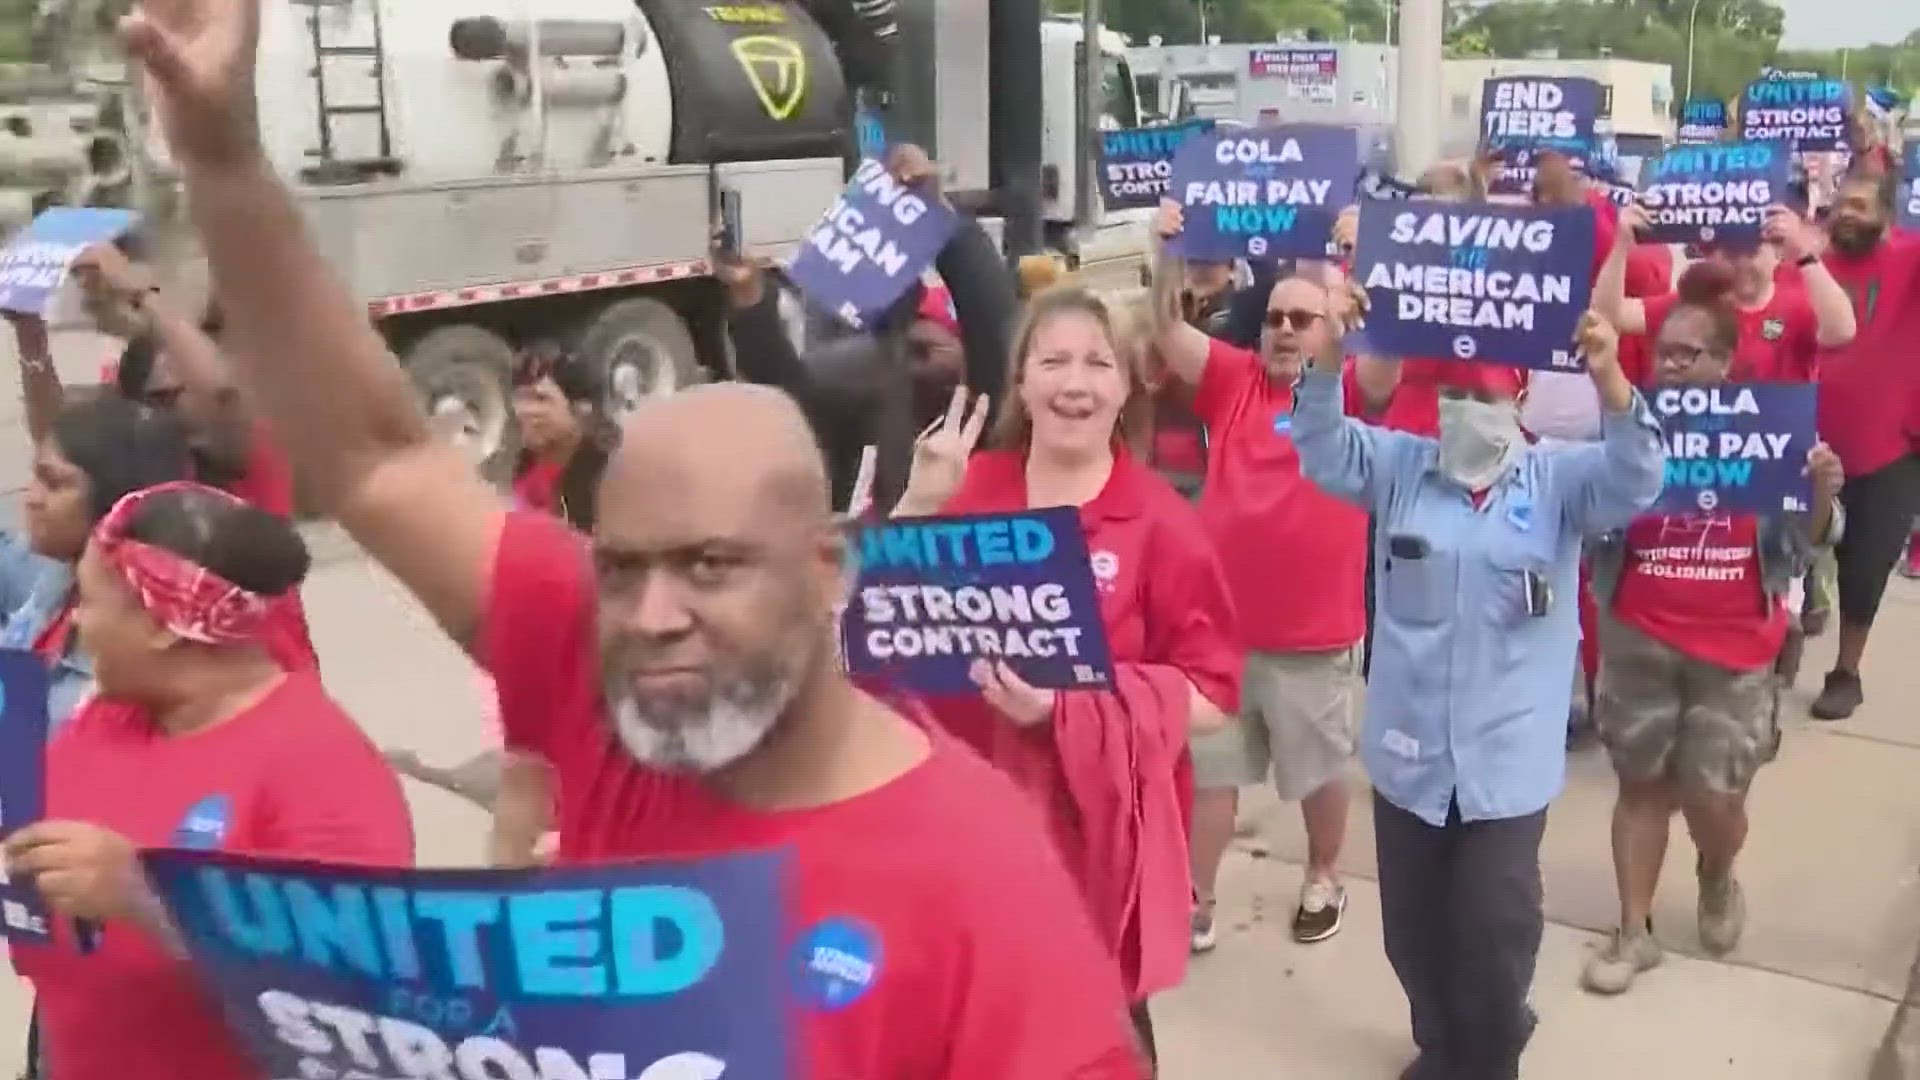 The UAW Union is threatening a strike for better wages and benefits from auto giants Ford, General Motors and Stellantis.